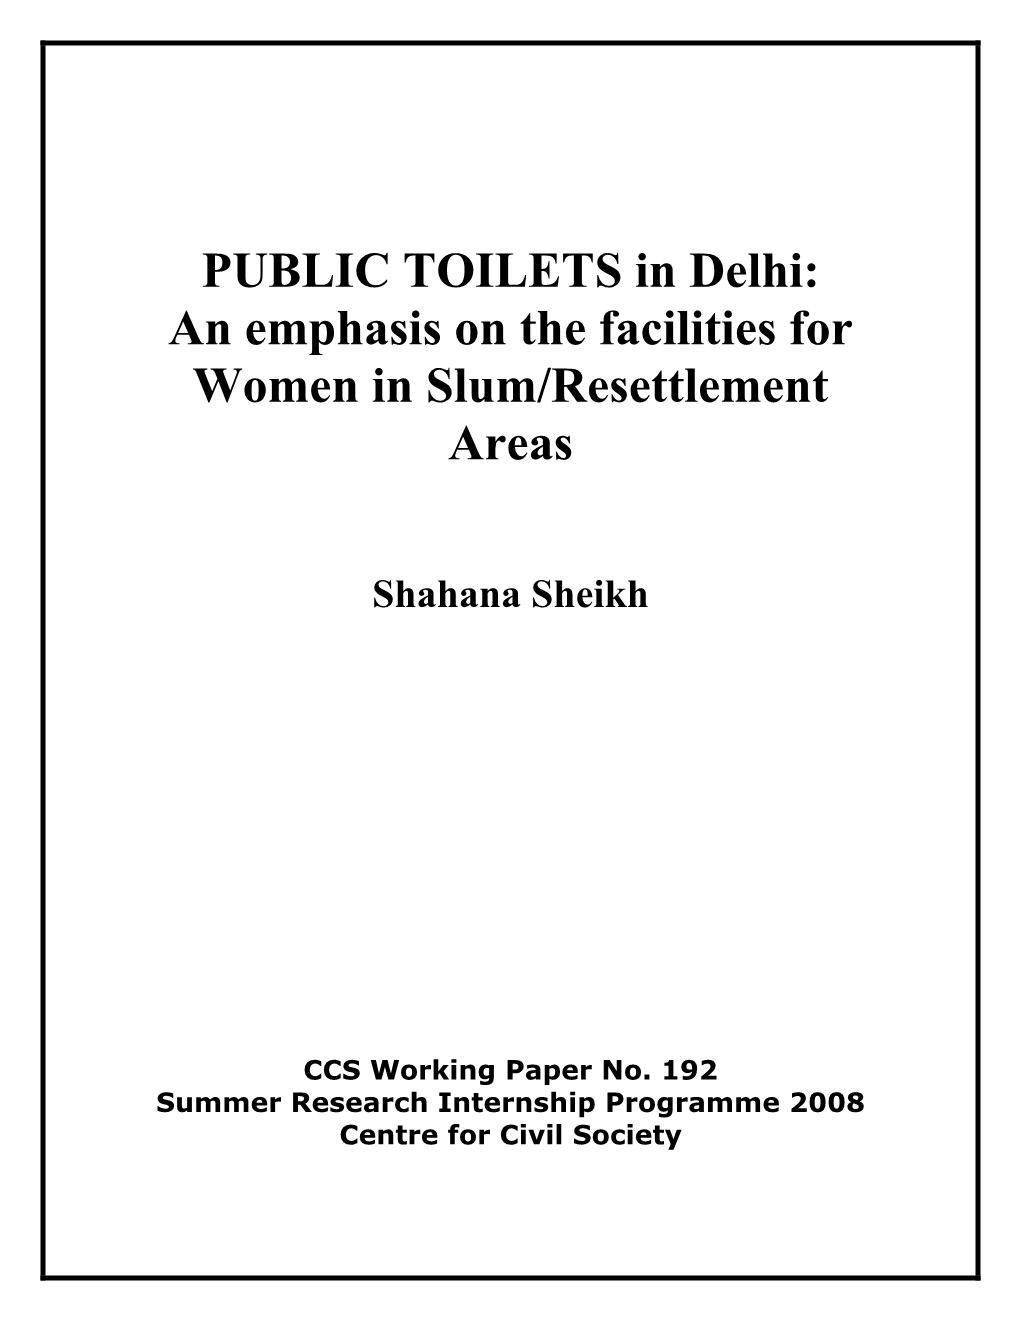 PUBLIC TOILETS in Delhi: an Emphasis on the Facilities for Women in Slum/Resettlement Areas